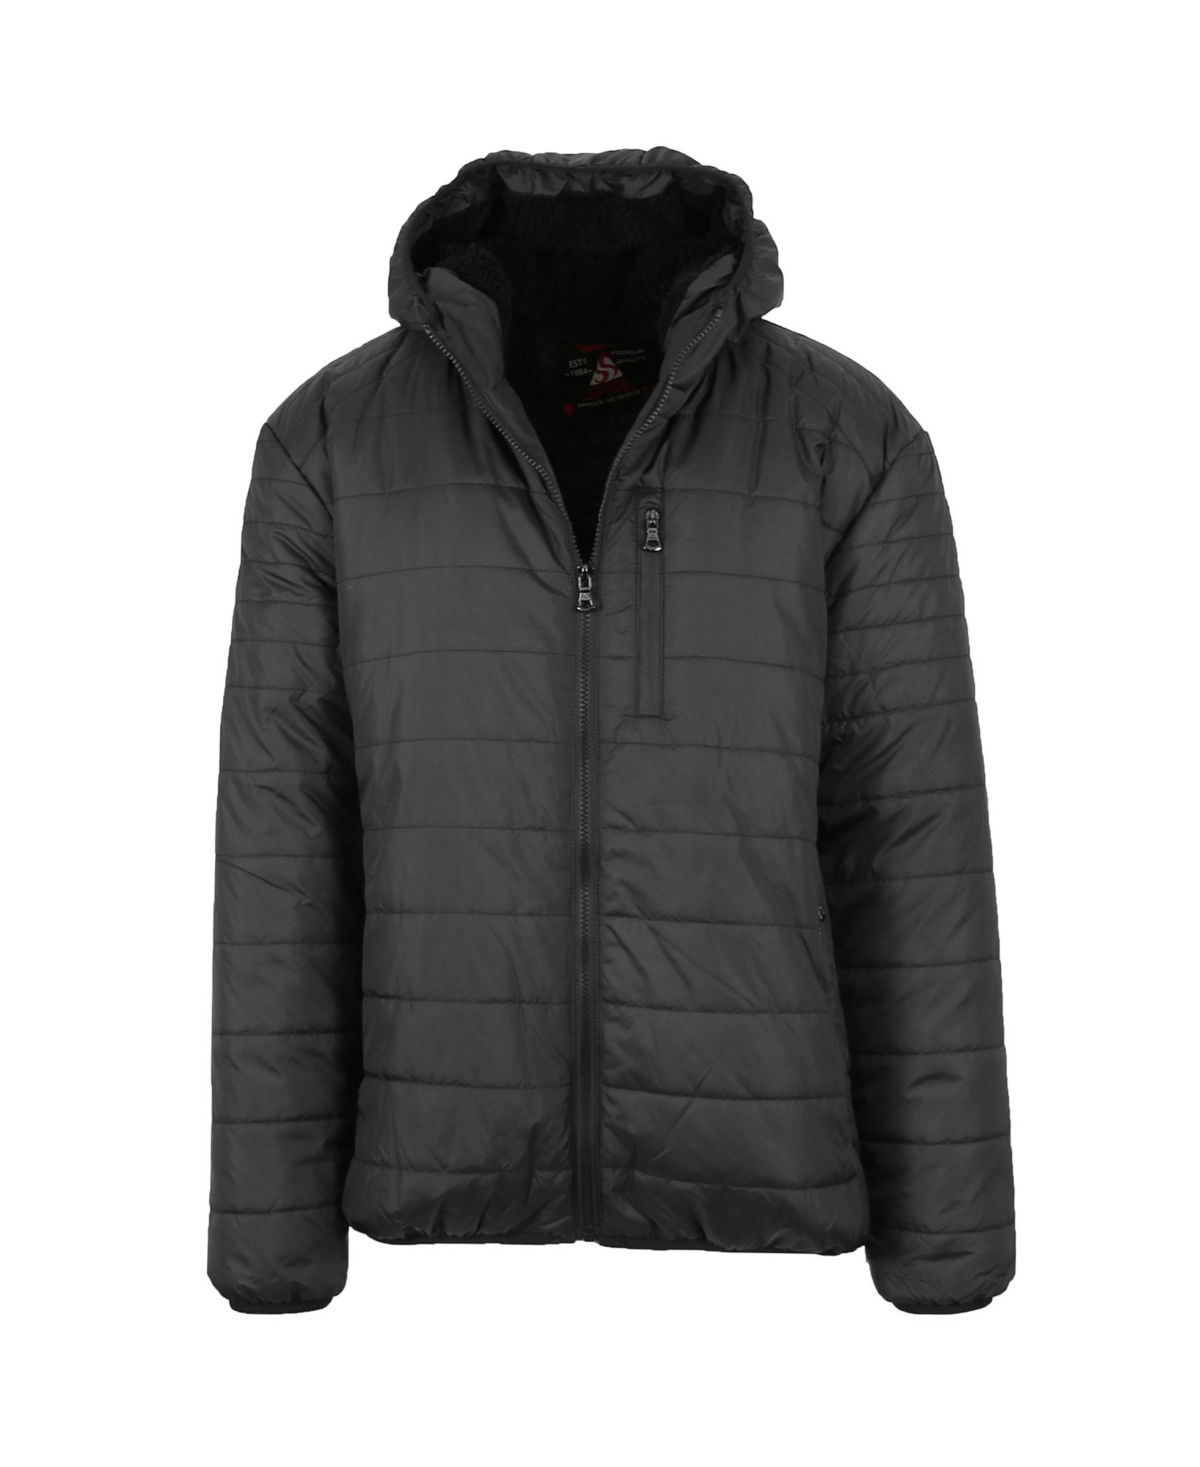 Men's Sherpa Lined Hooded Puffer Jacket - Olive